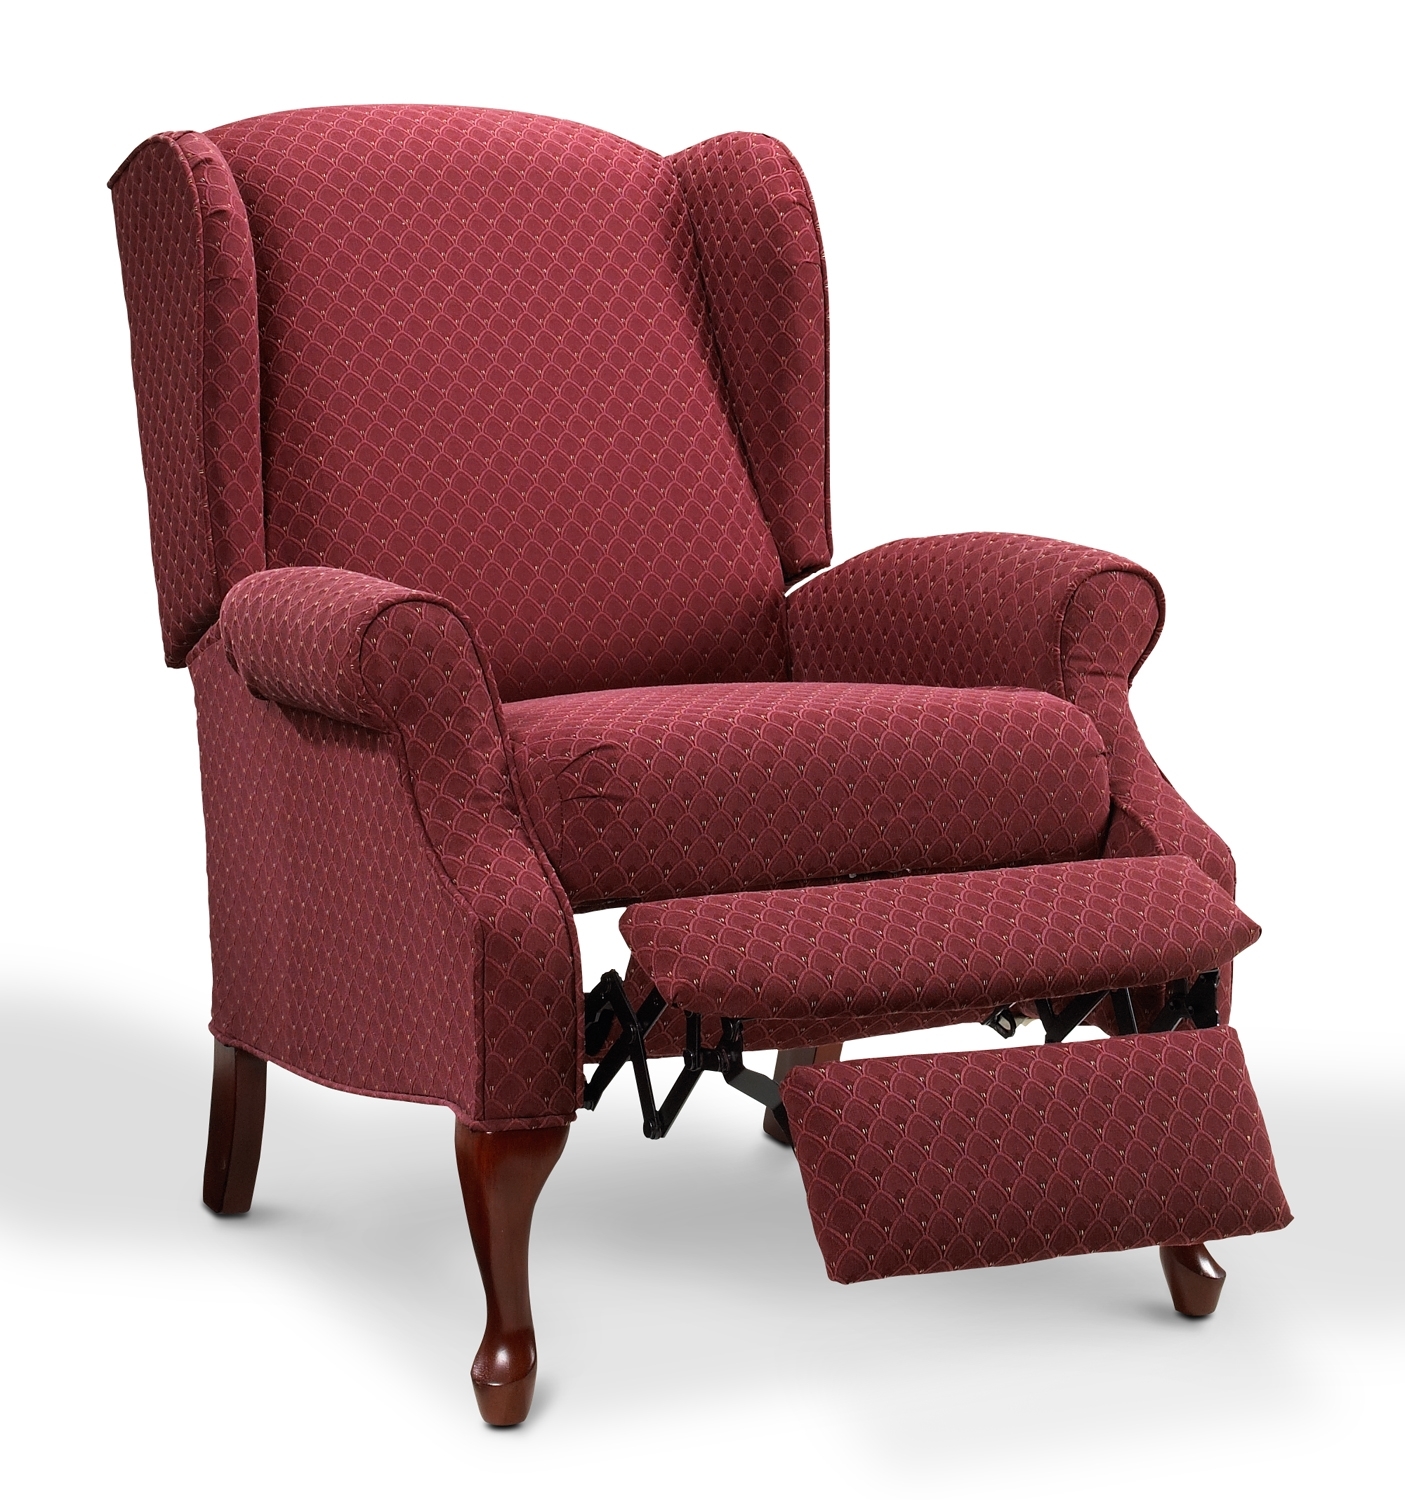 High Back Recliner Chairs - Ideas on Foter